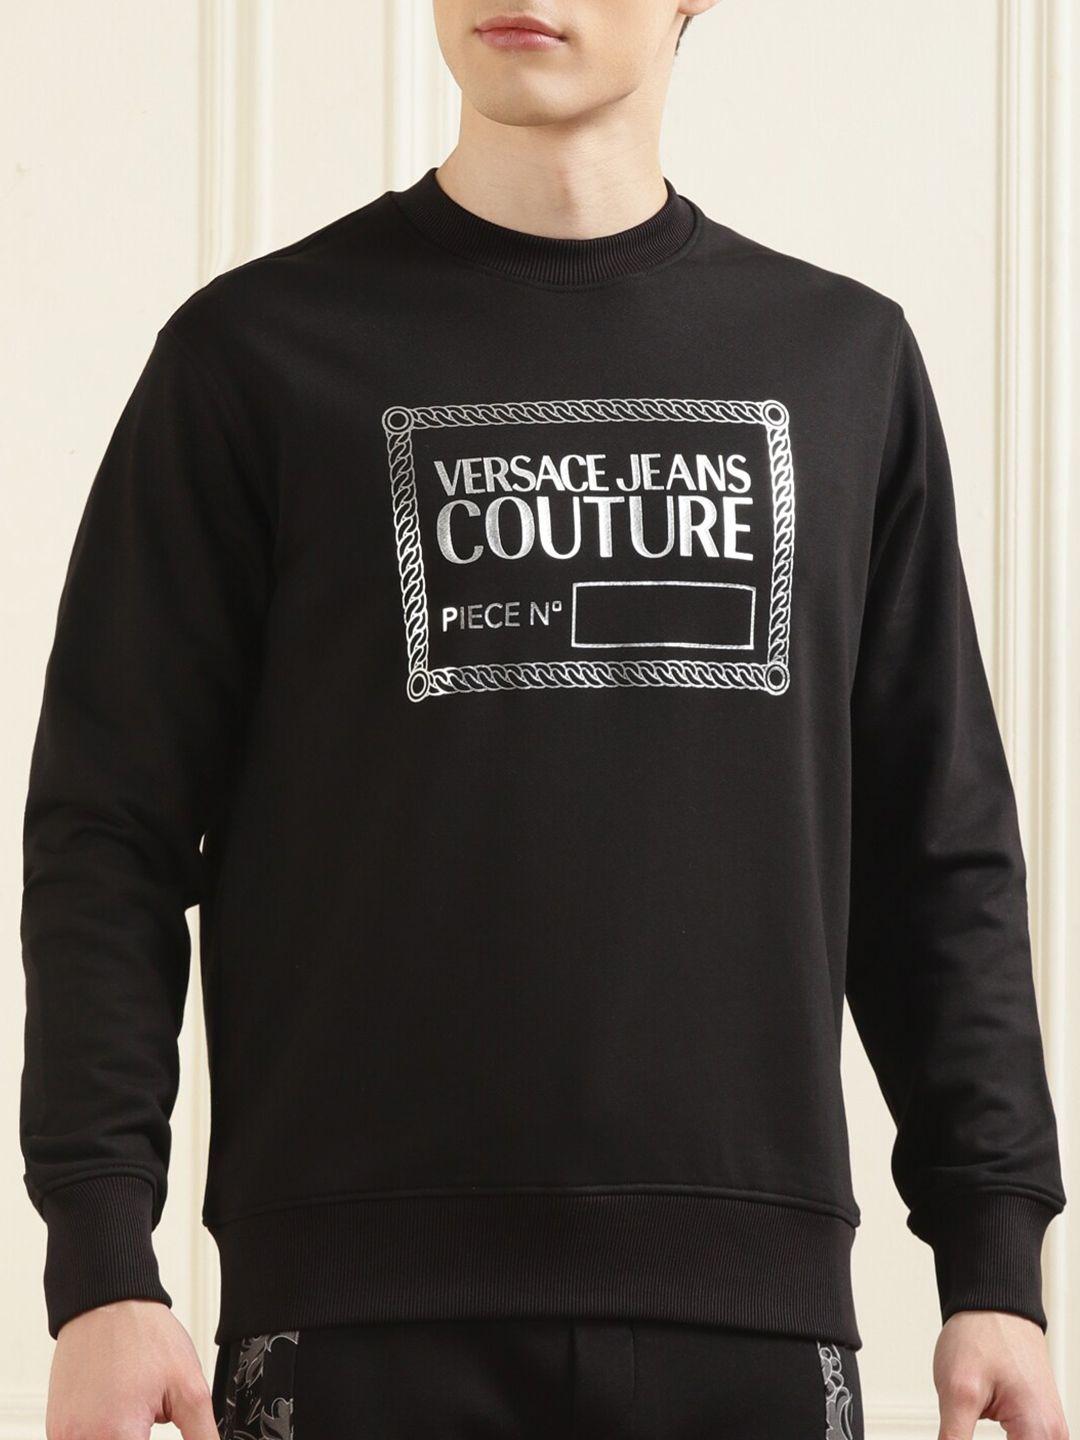 versace-jeans-couture-typography-printed-pullover-sweatshirt